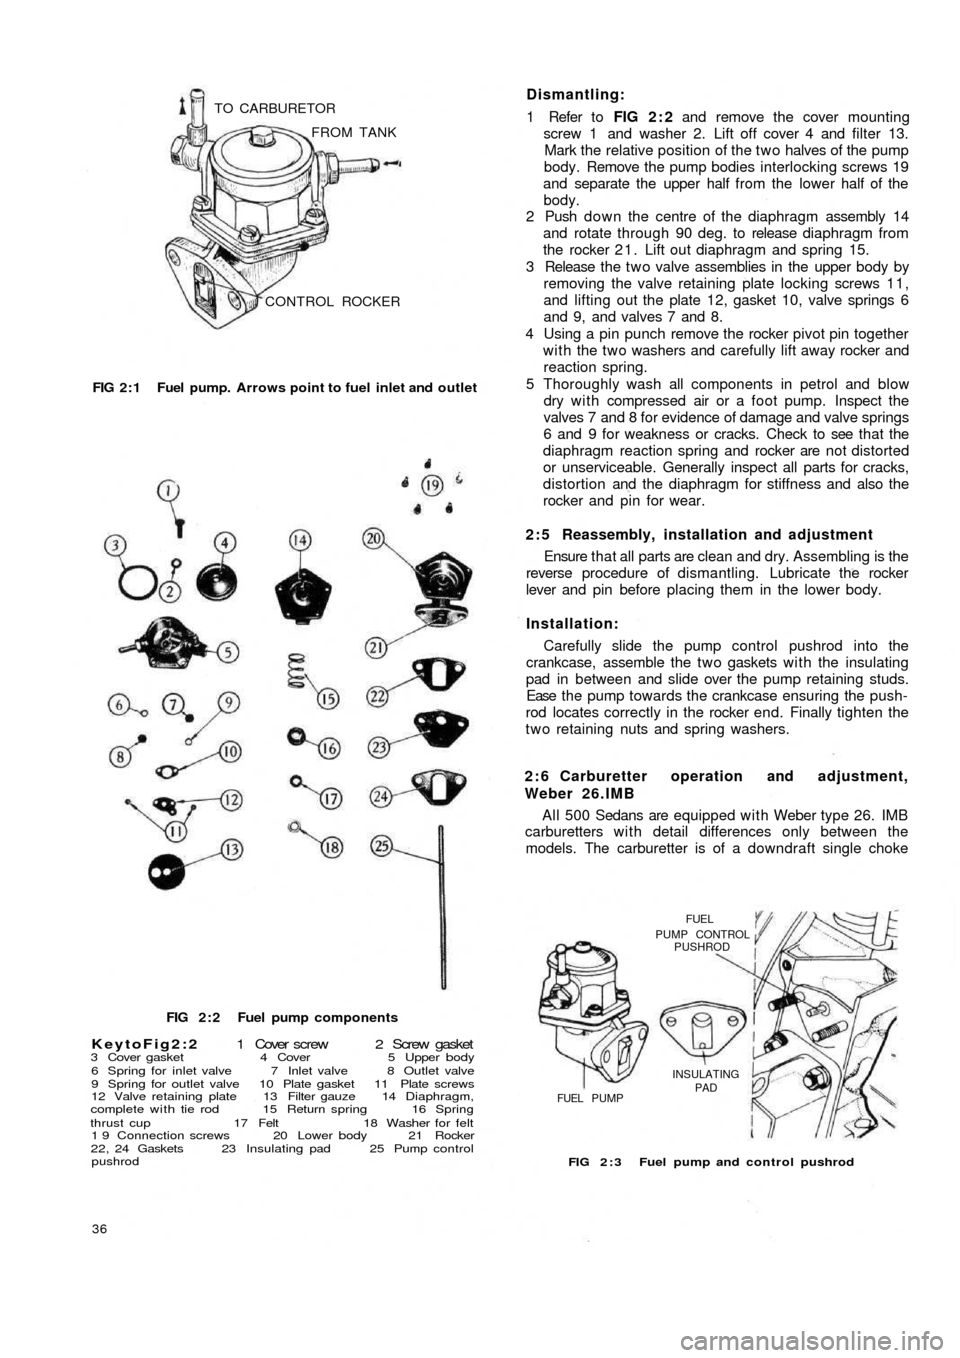 FIAT 500 1959 1.G Workshop Manual CONTROL ROCKER FROM TANK TO CARBURETOR
FIG 2 : 1  Fuel pump. Arrows point to fuel  inlet and outlet
FIG 2 : 2  Fuel pump components
KeytoFig2:2 1  Cover  screw  2  Screw  gasket3 Cover gasket 4 Cover 